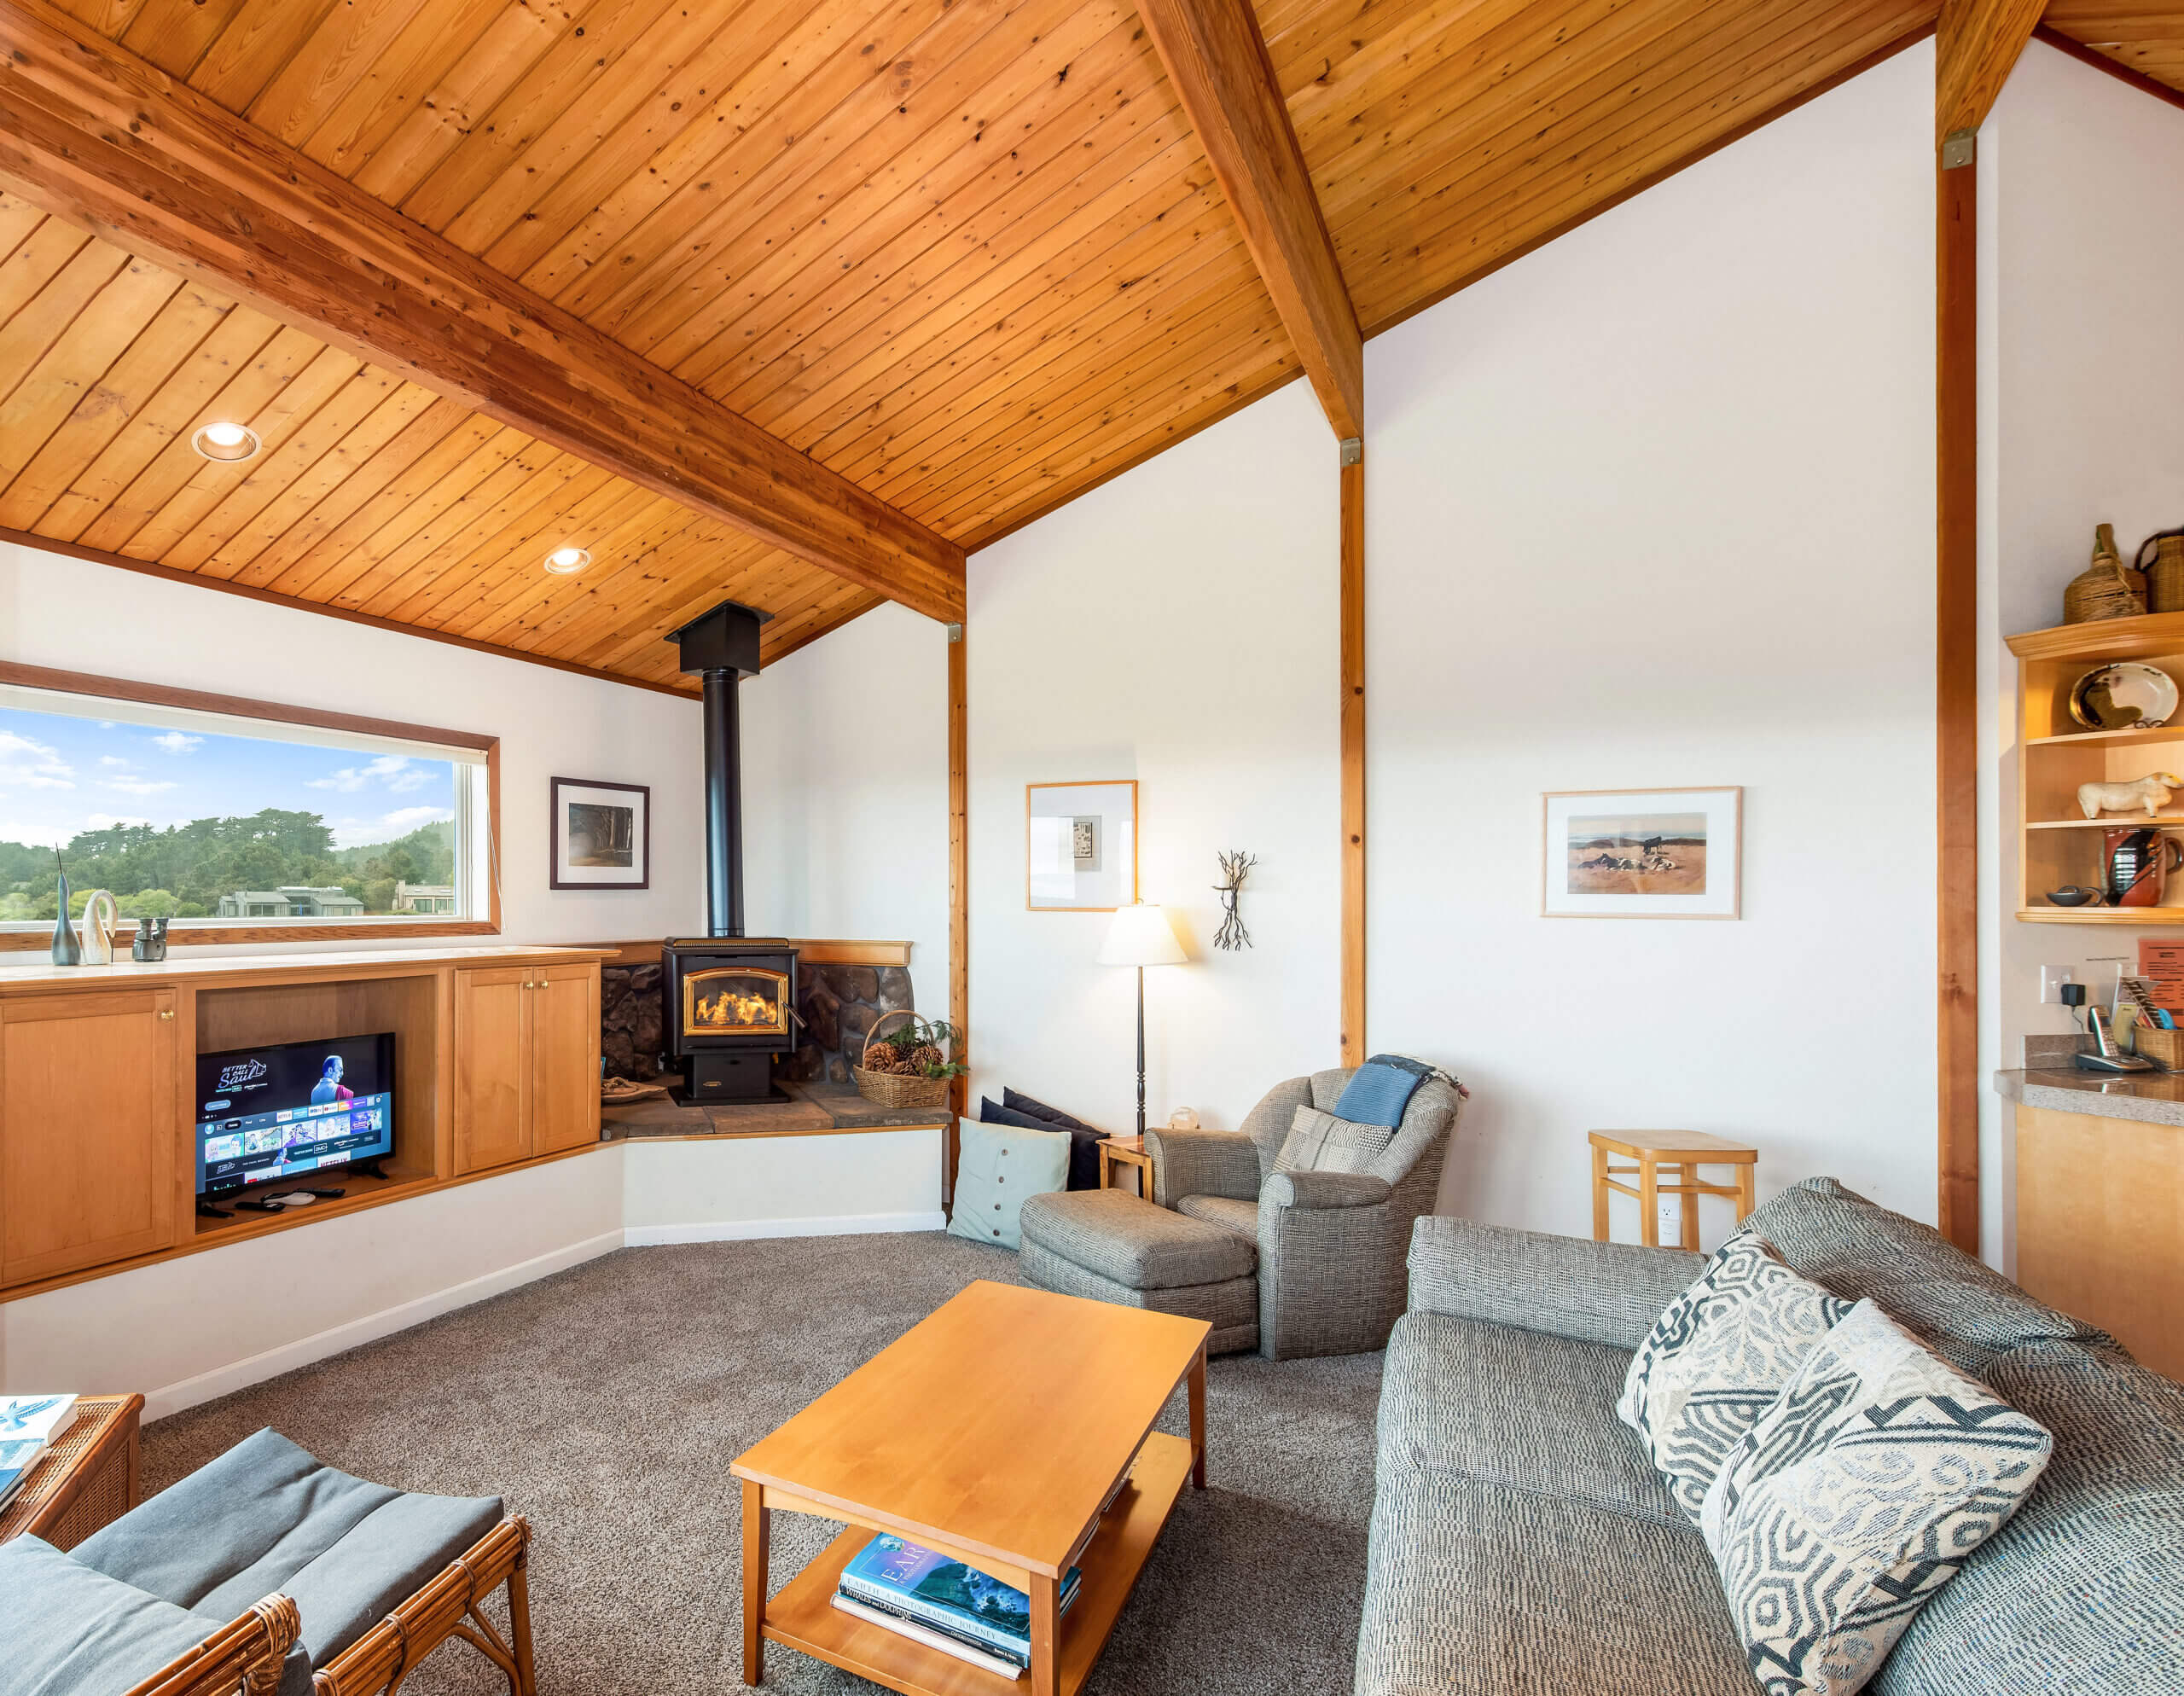 Pelicans Rest upper living area with TV, firestove and wood beam ceilings